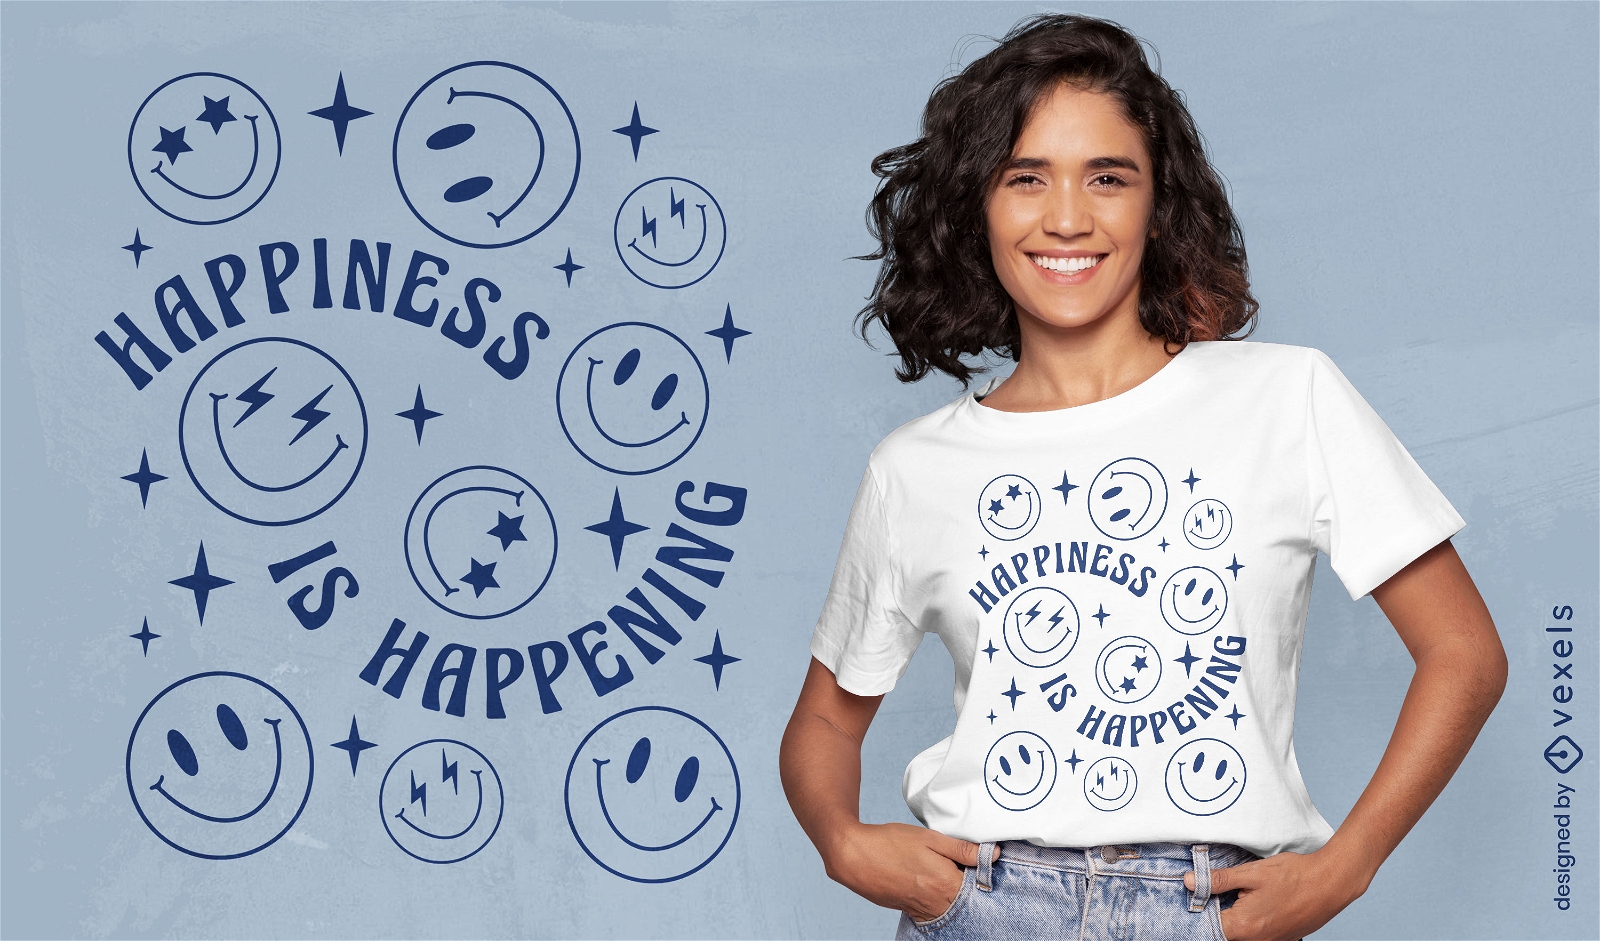 Smiley faces happiness t-shirt design